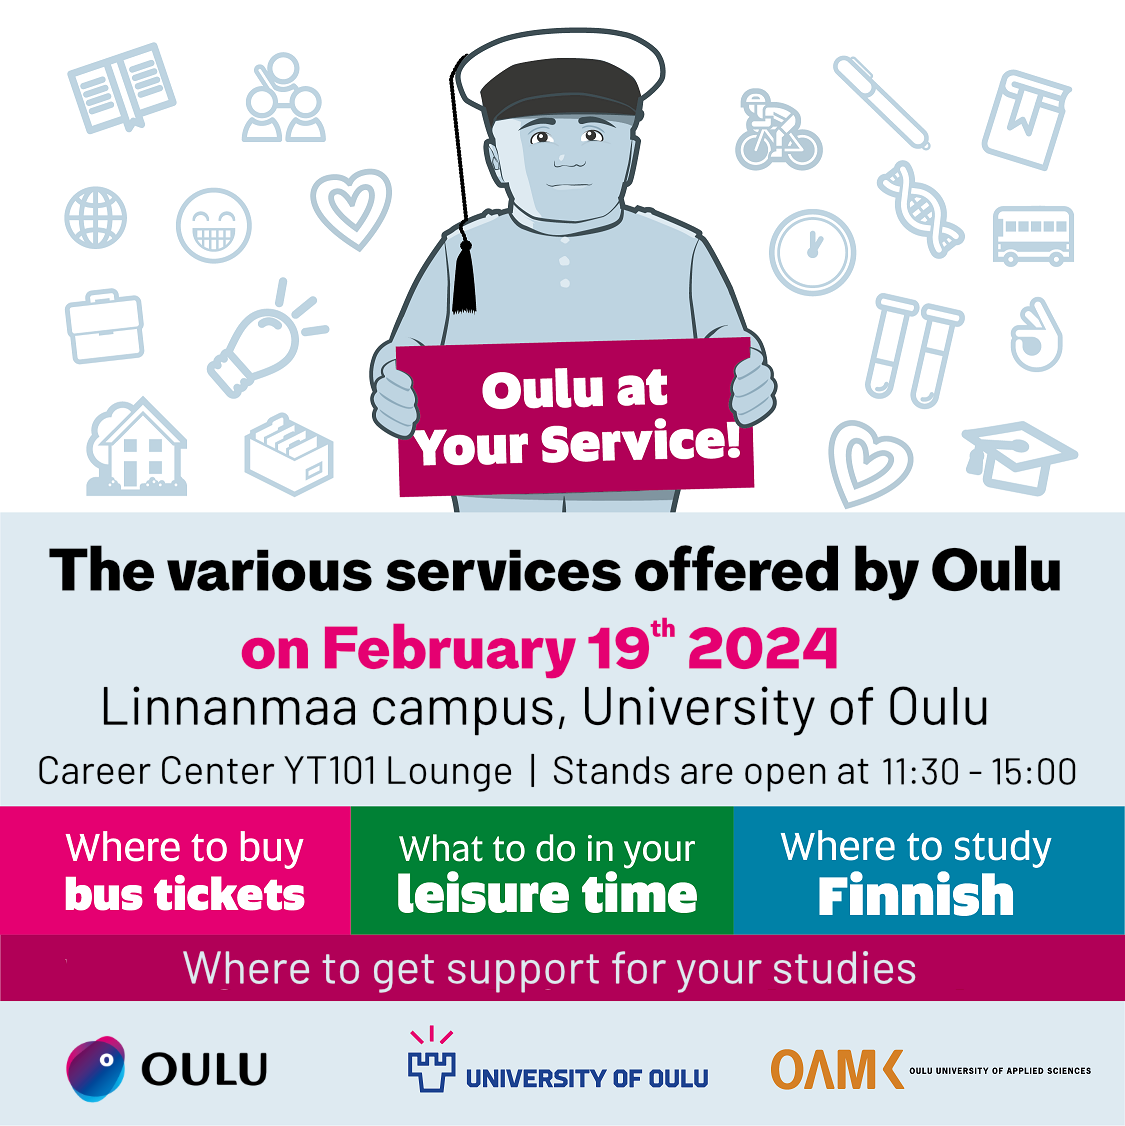 Oulu at Your Service ad